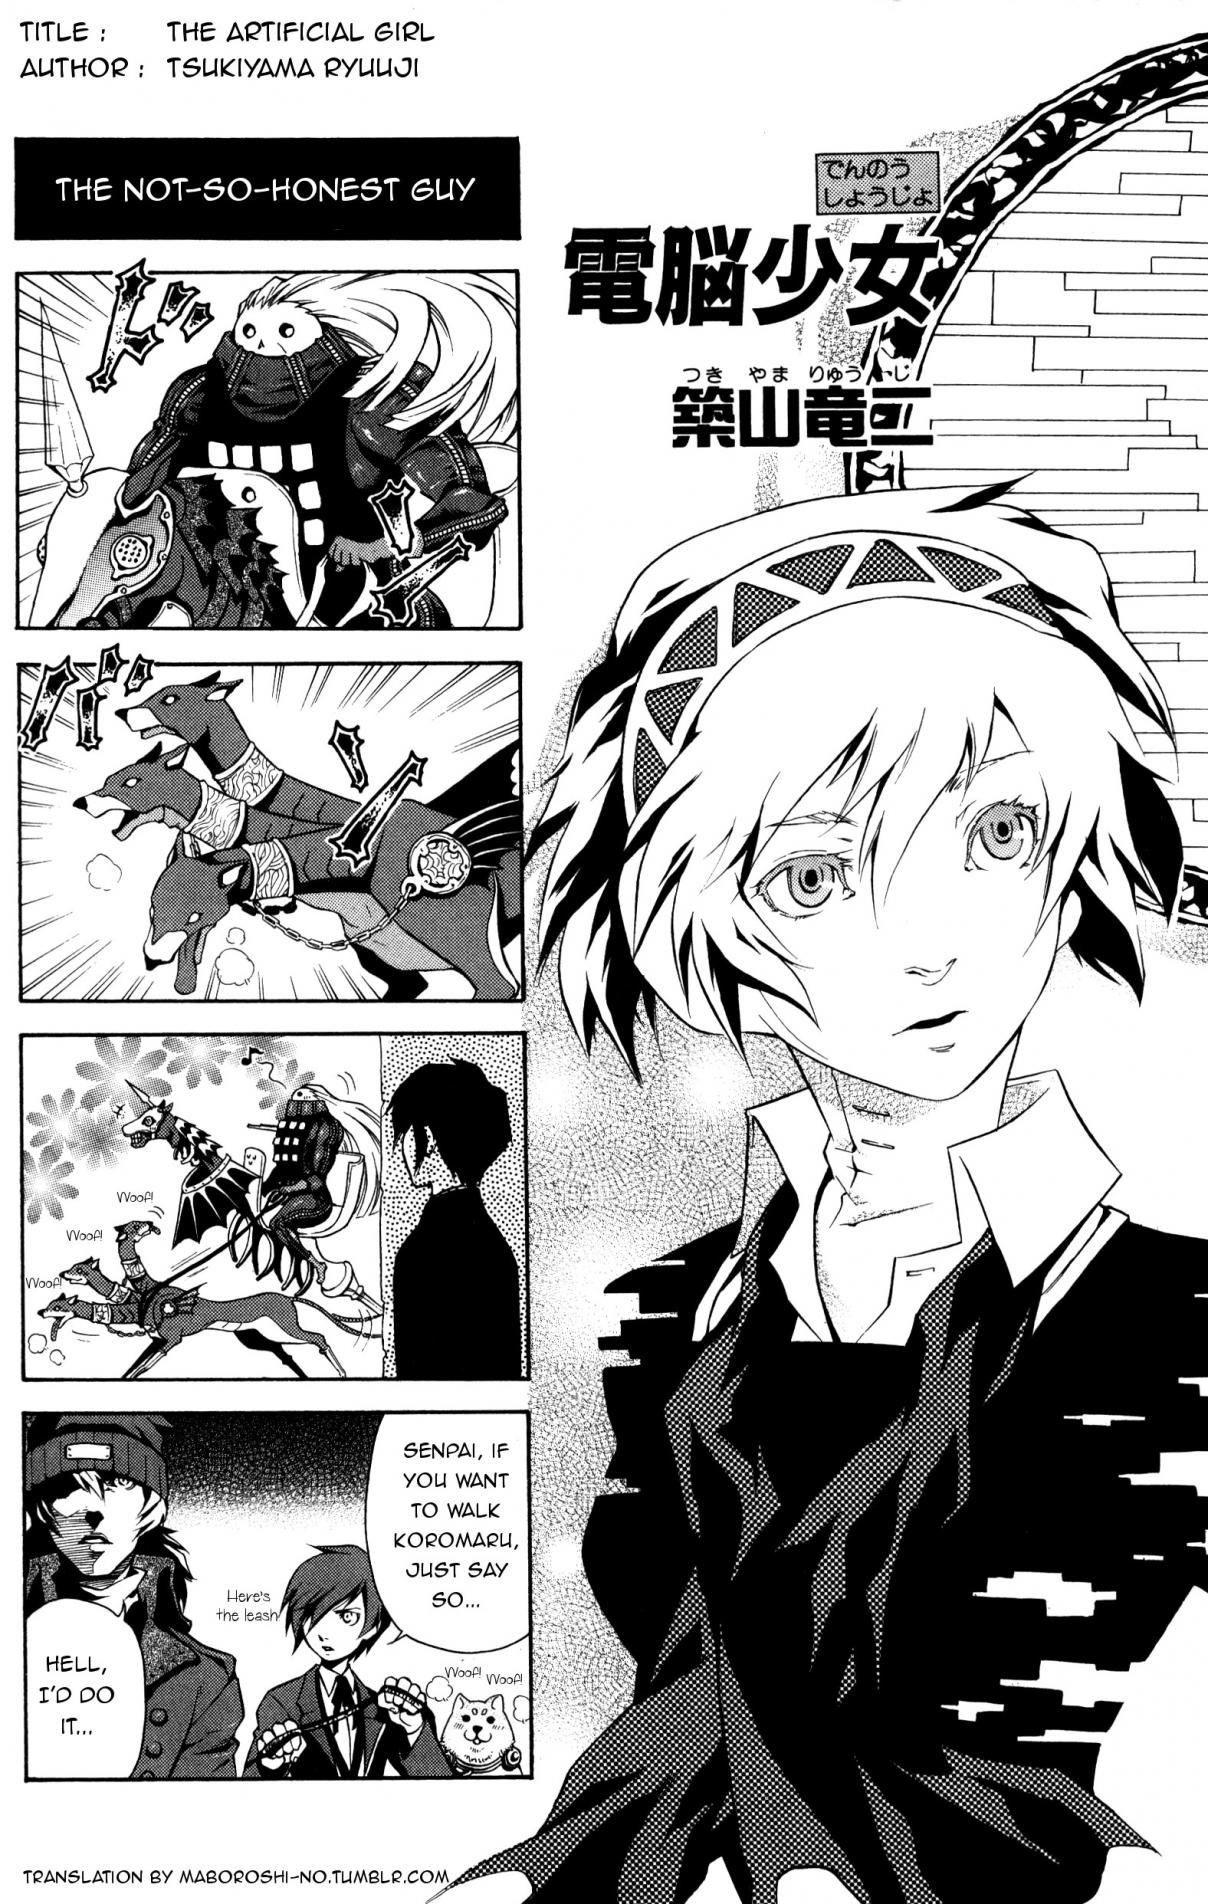 Persona 3 4Koma Kings Vol. 2 Ch. 2 The artificial girl